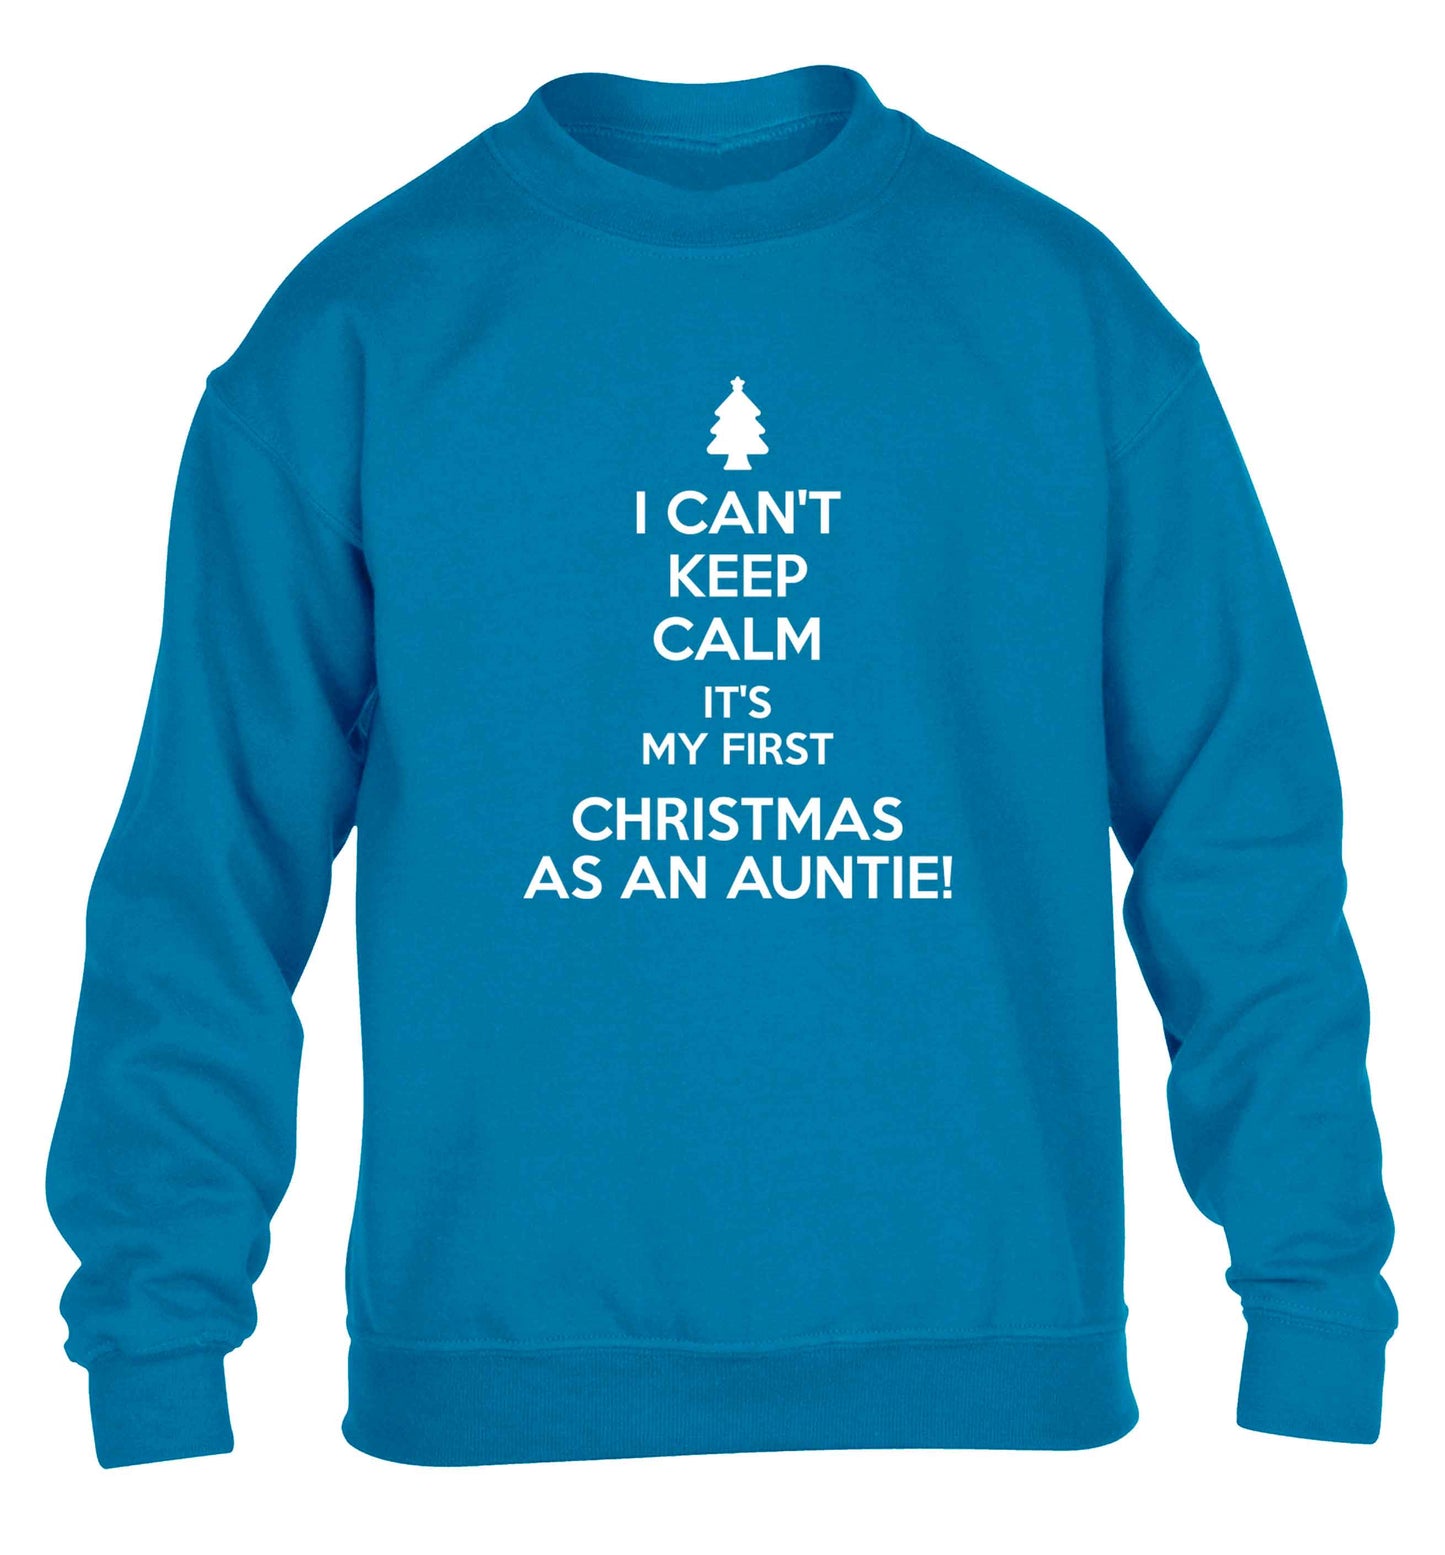 I can't keep calm it's my first Christmas as an auntie! children's blue sweater 12-13 Years